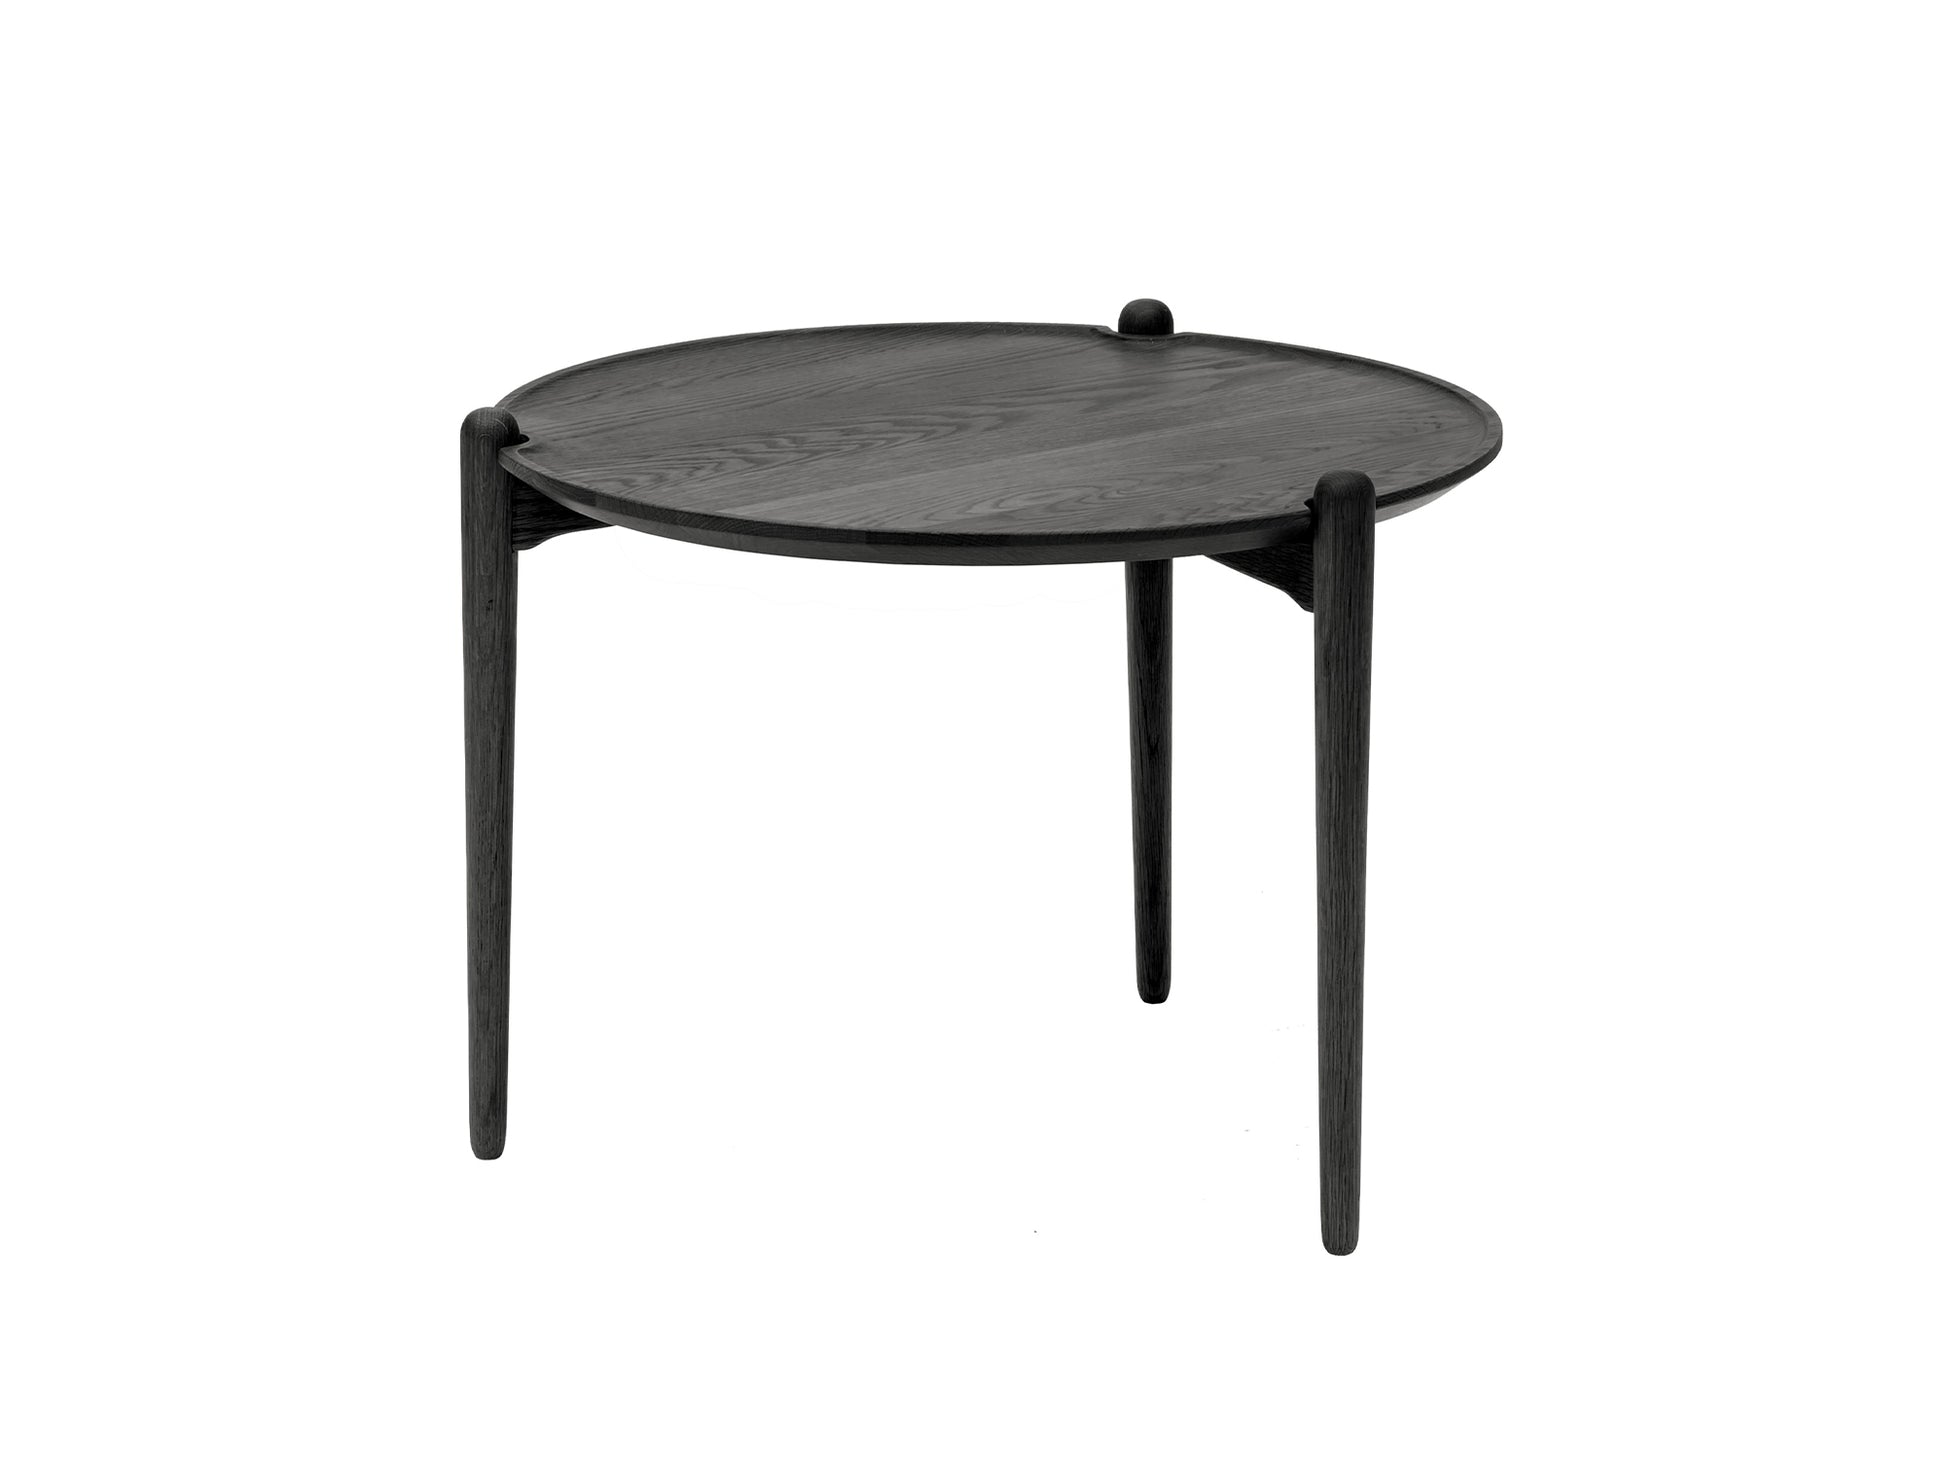 Aria Table by Design House Stockholm - High / Black Lacquered Oak